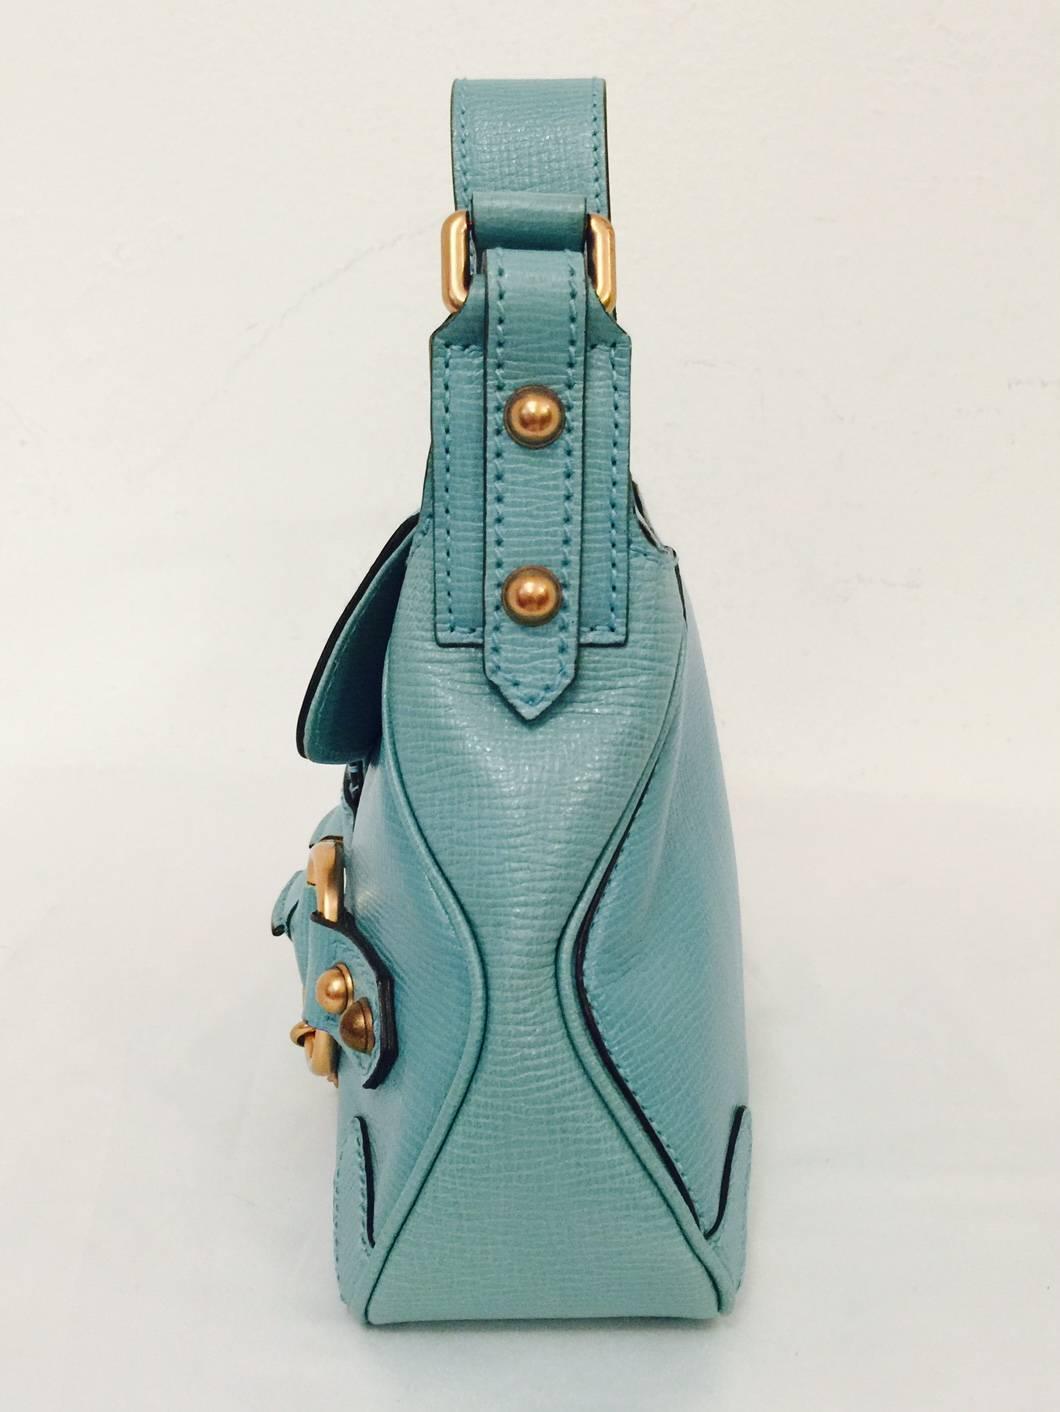 Textured Aqua Leather Shoulder Bag is undeniably Gucci!  Features exquisite Italian leather and craftsmanship, front flap, and adjustable shoulder strap.  Aqua leather and fabric interior houses one zippered compartment. The finishing touch?  One